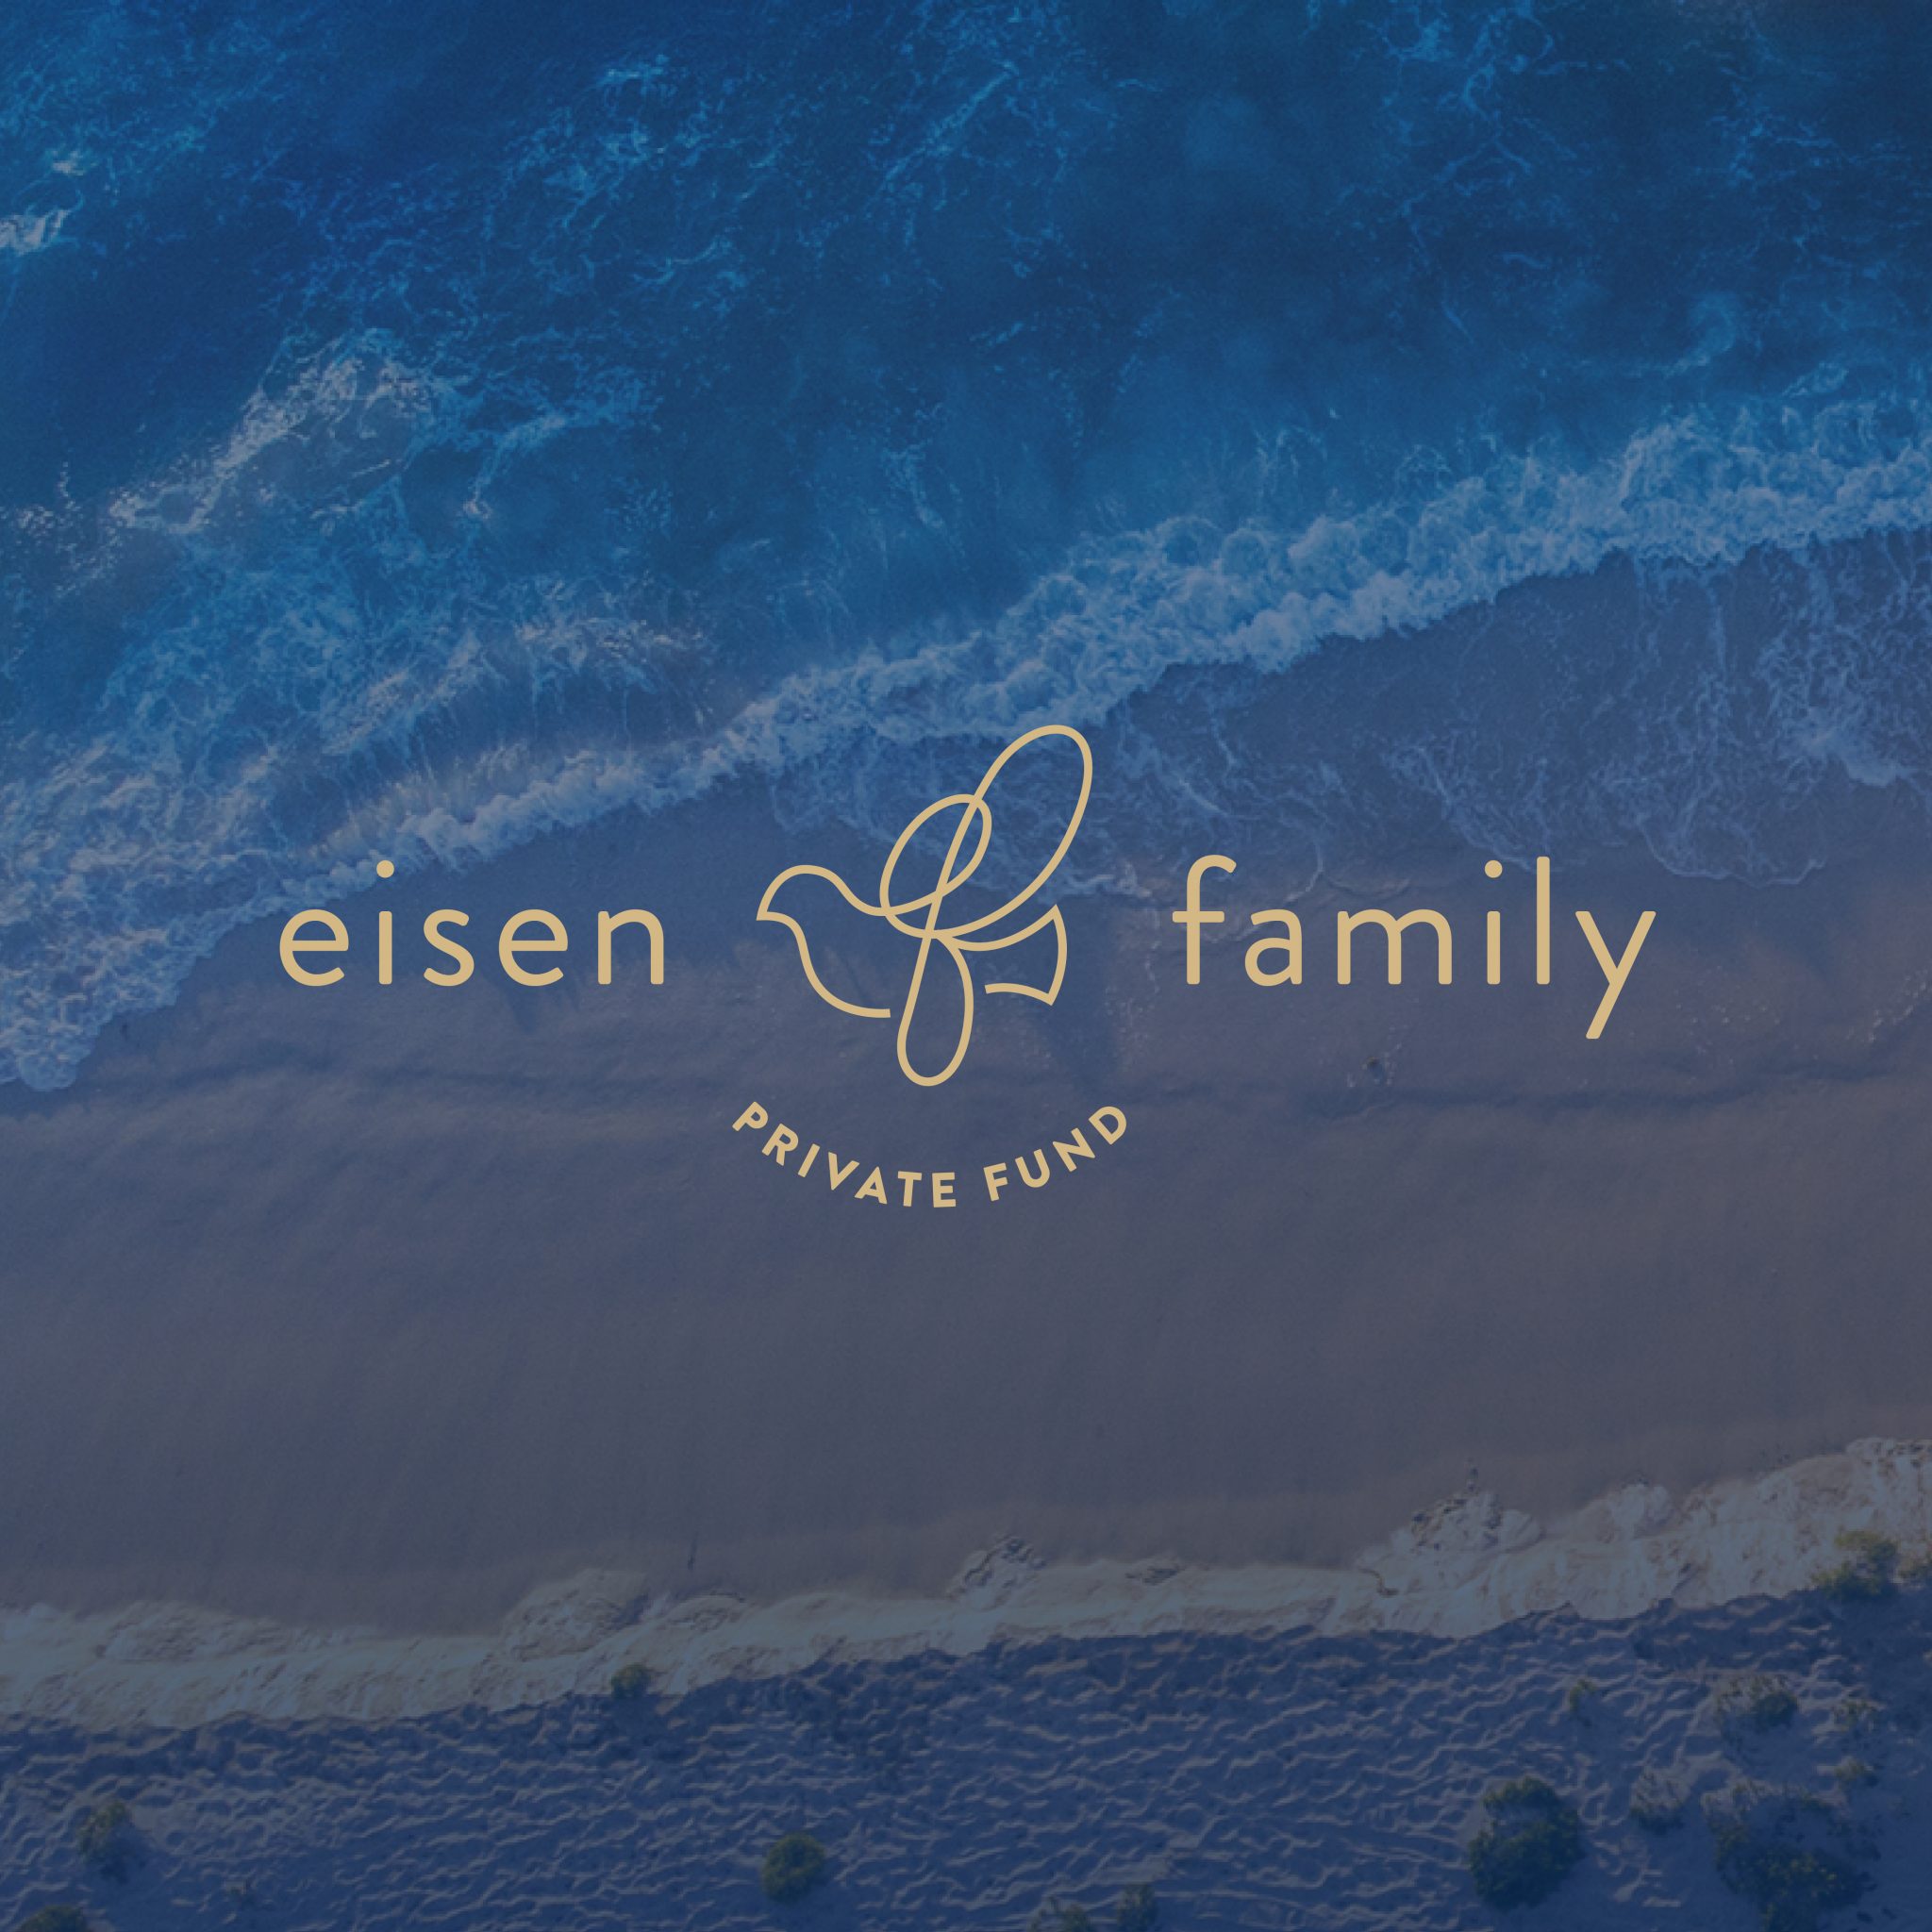 Eisen Family Private Fund full logo in gold on a beach image background with dark blue overlay